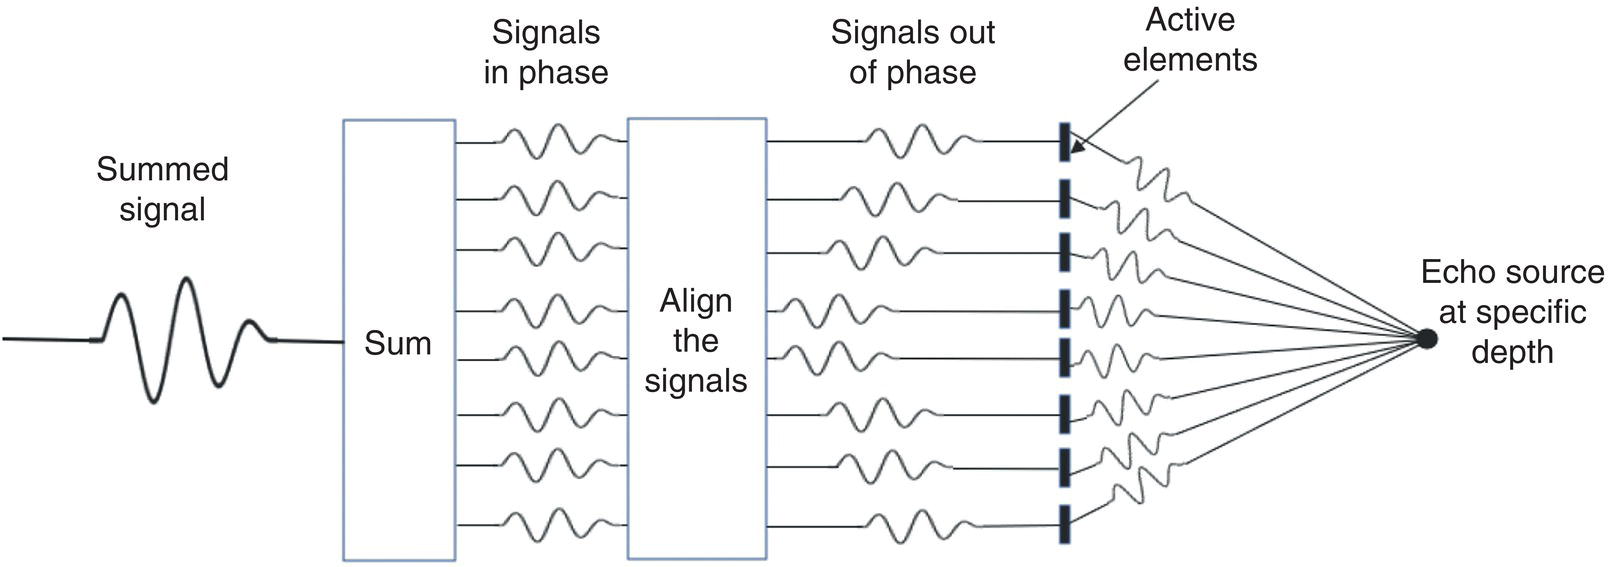 A horizontal flow diagram includes the following from left to right. Summed signal, sum, signals in phase, align the signals, signals out of phase, active elements, and echo source at specific depth.